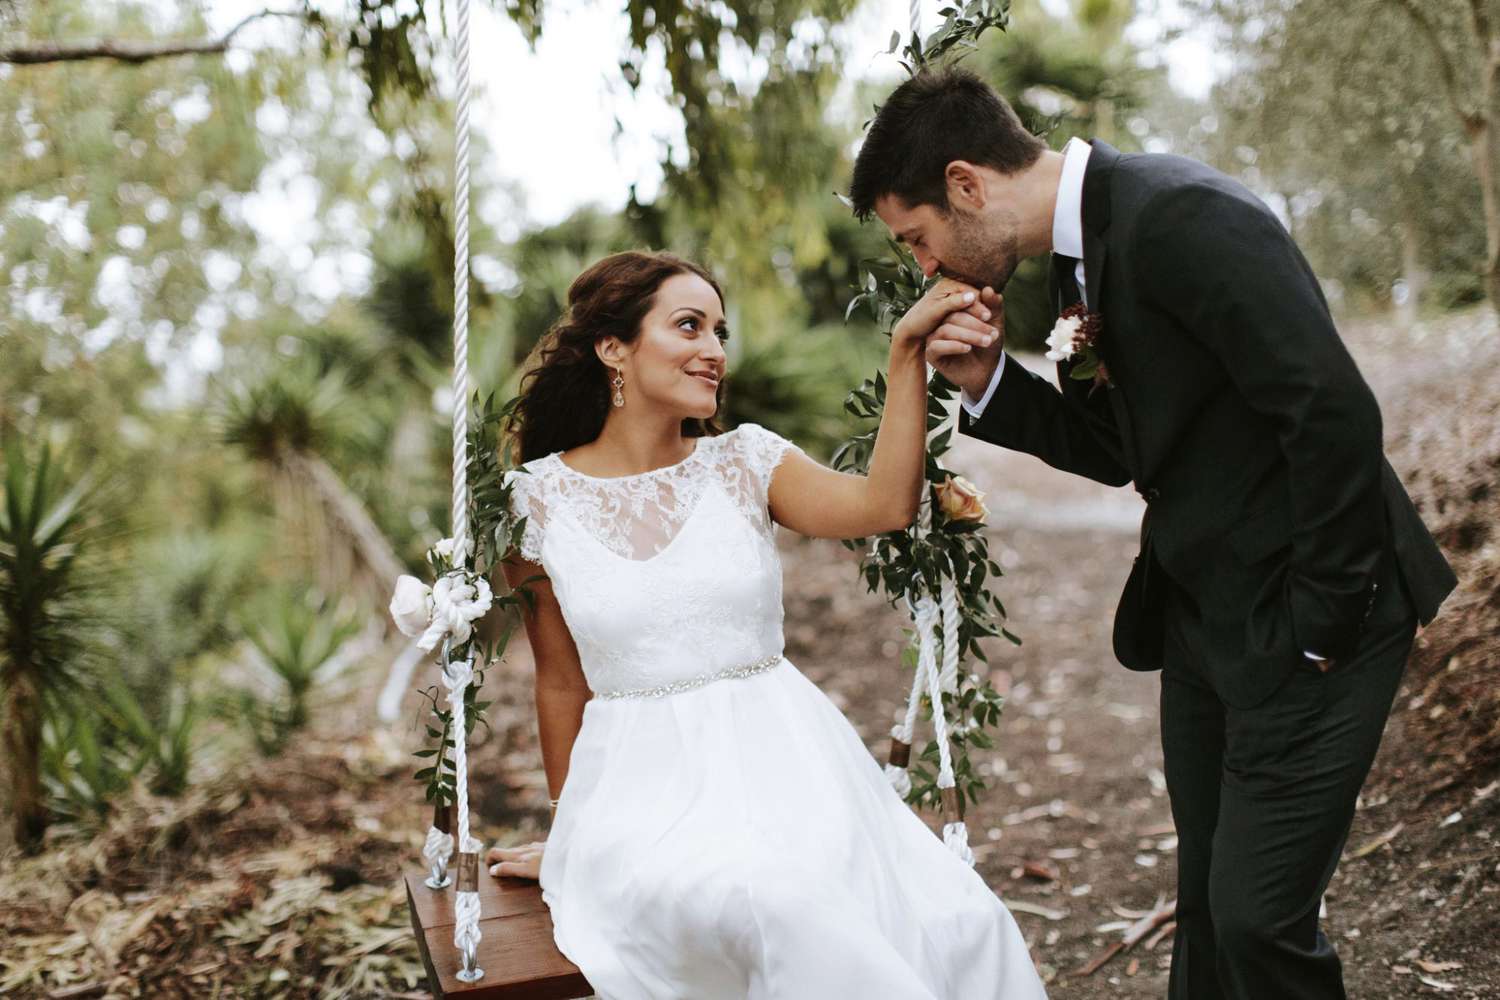 Capture your special moments through timeless wedding trends